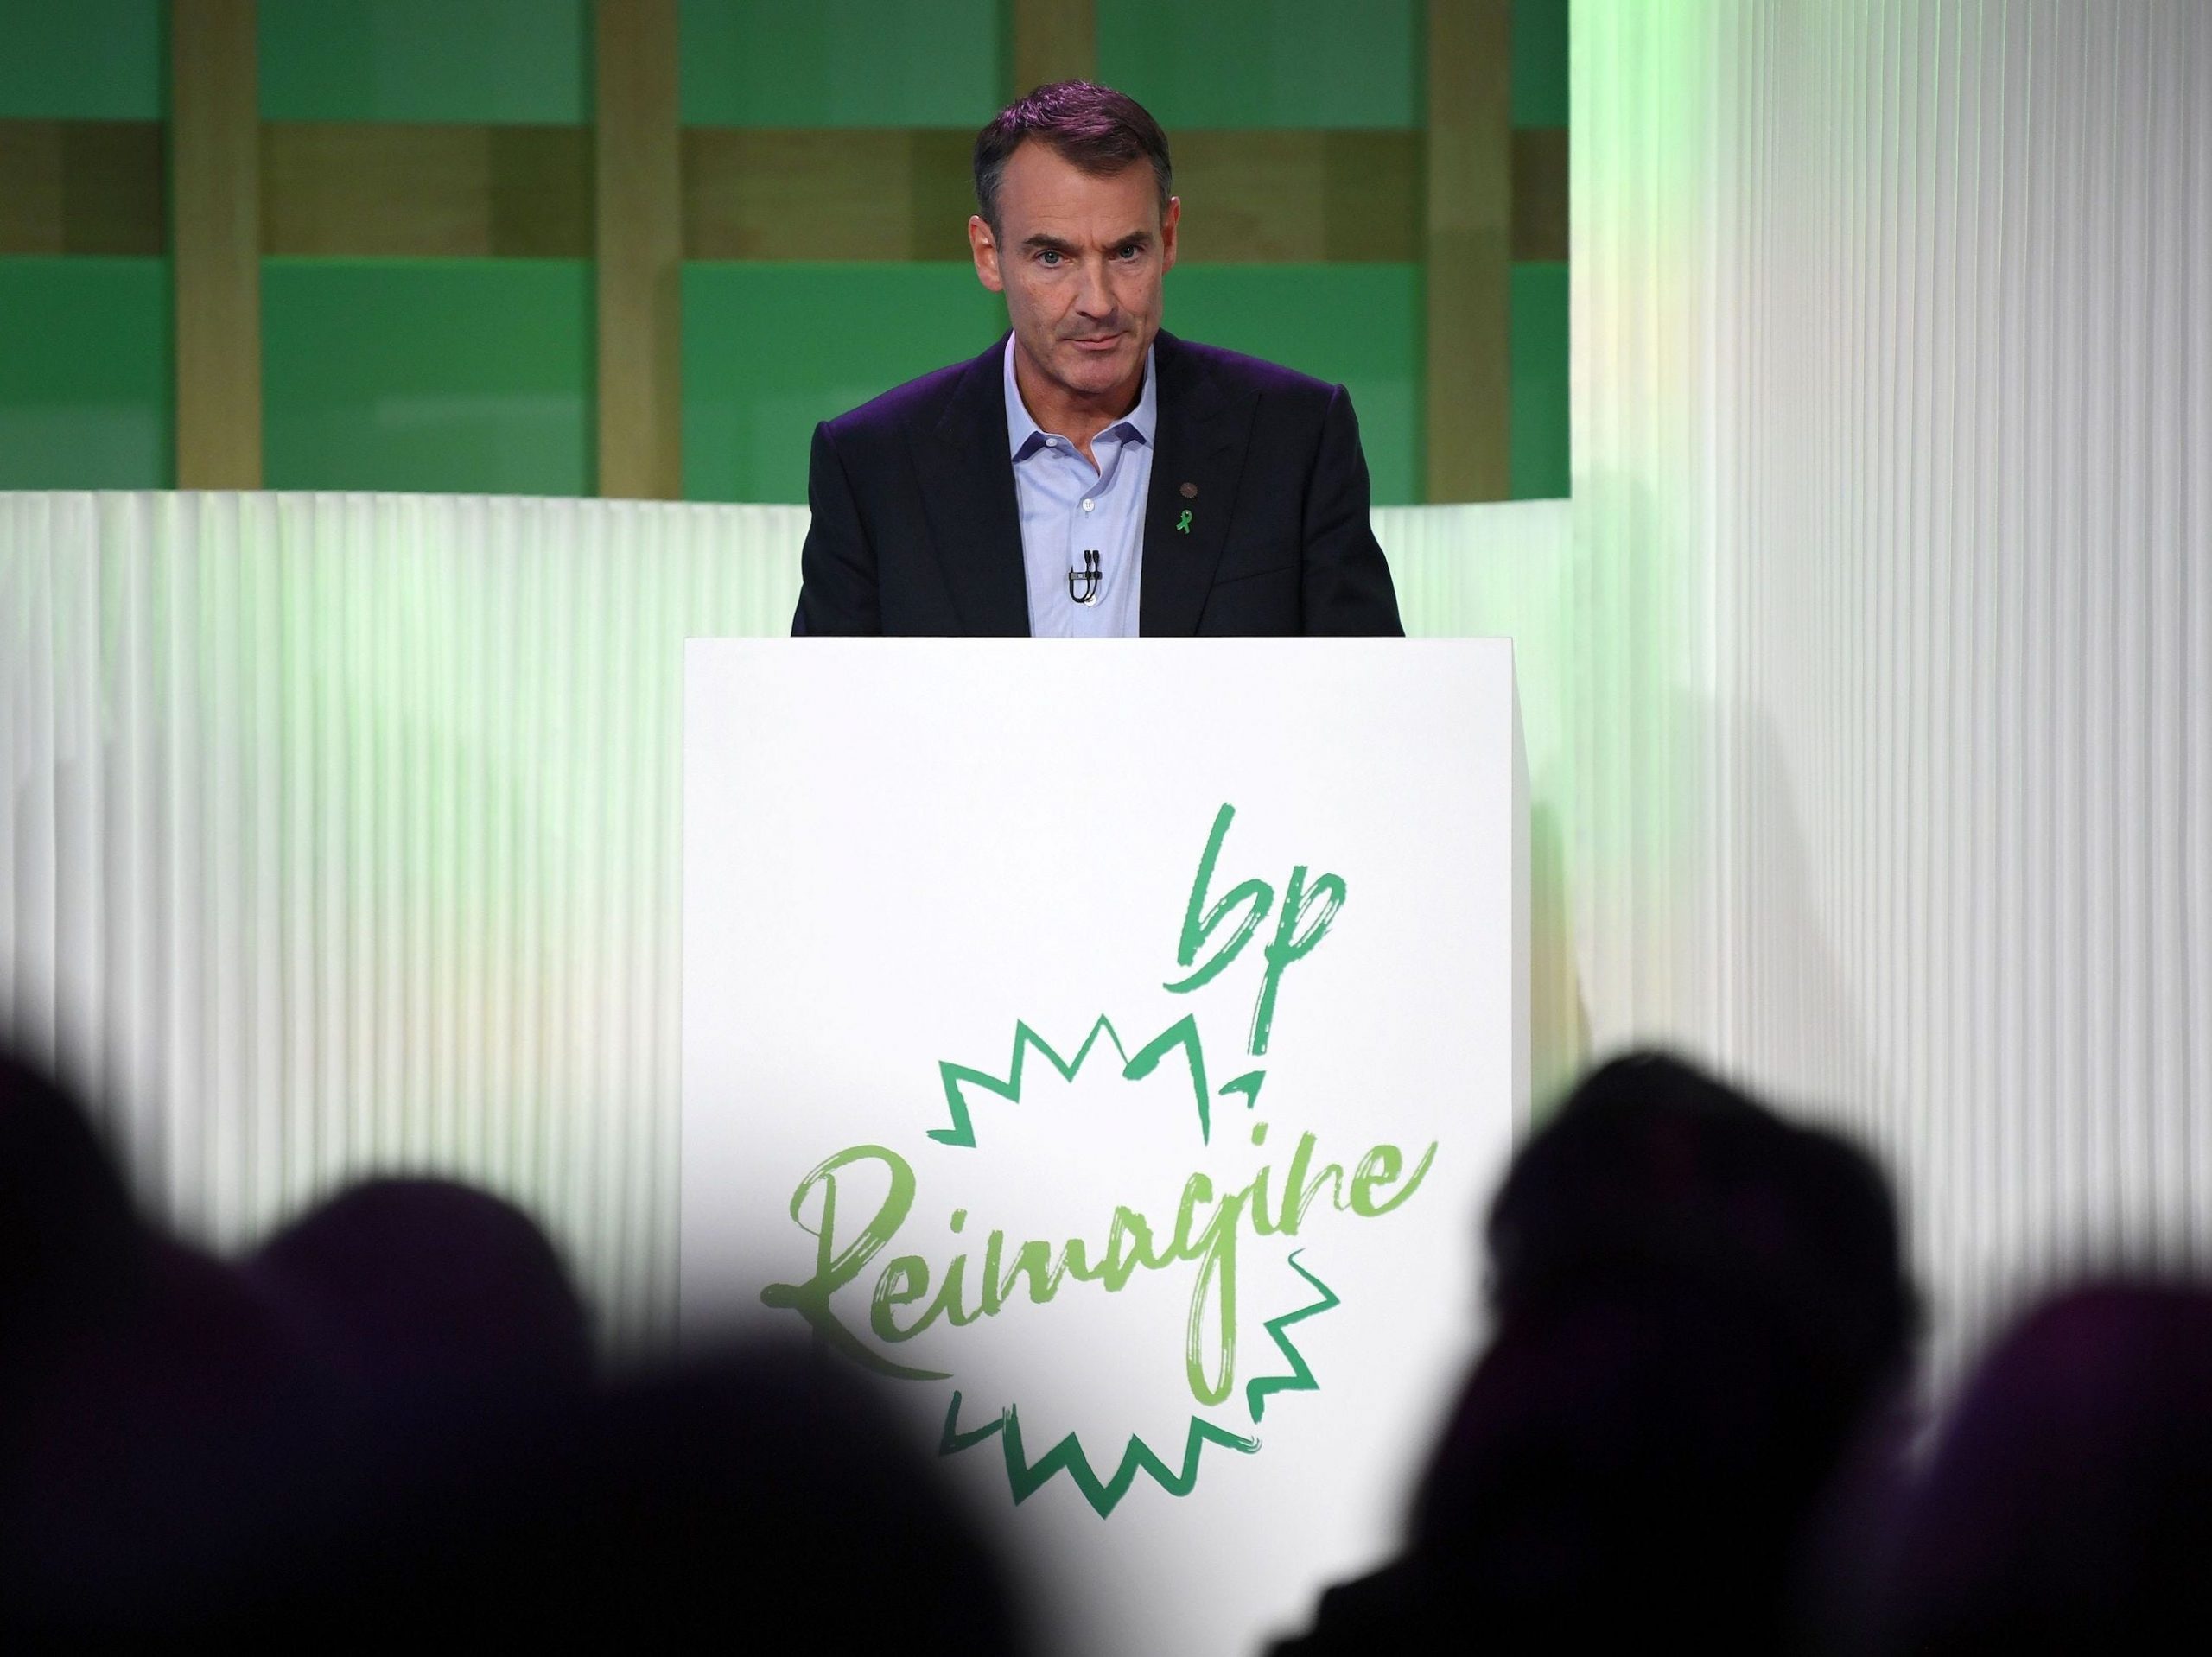 BP CEO Bernard Looney speaks during an event in London on February 12, 2020